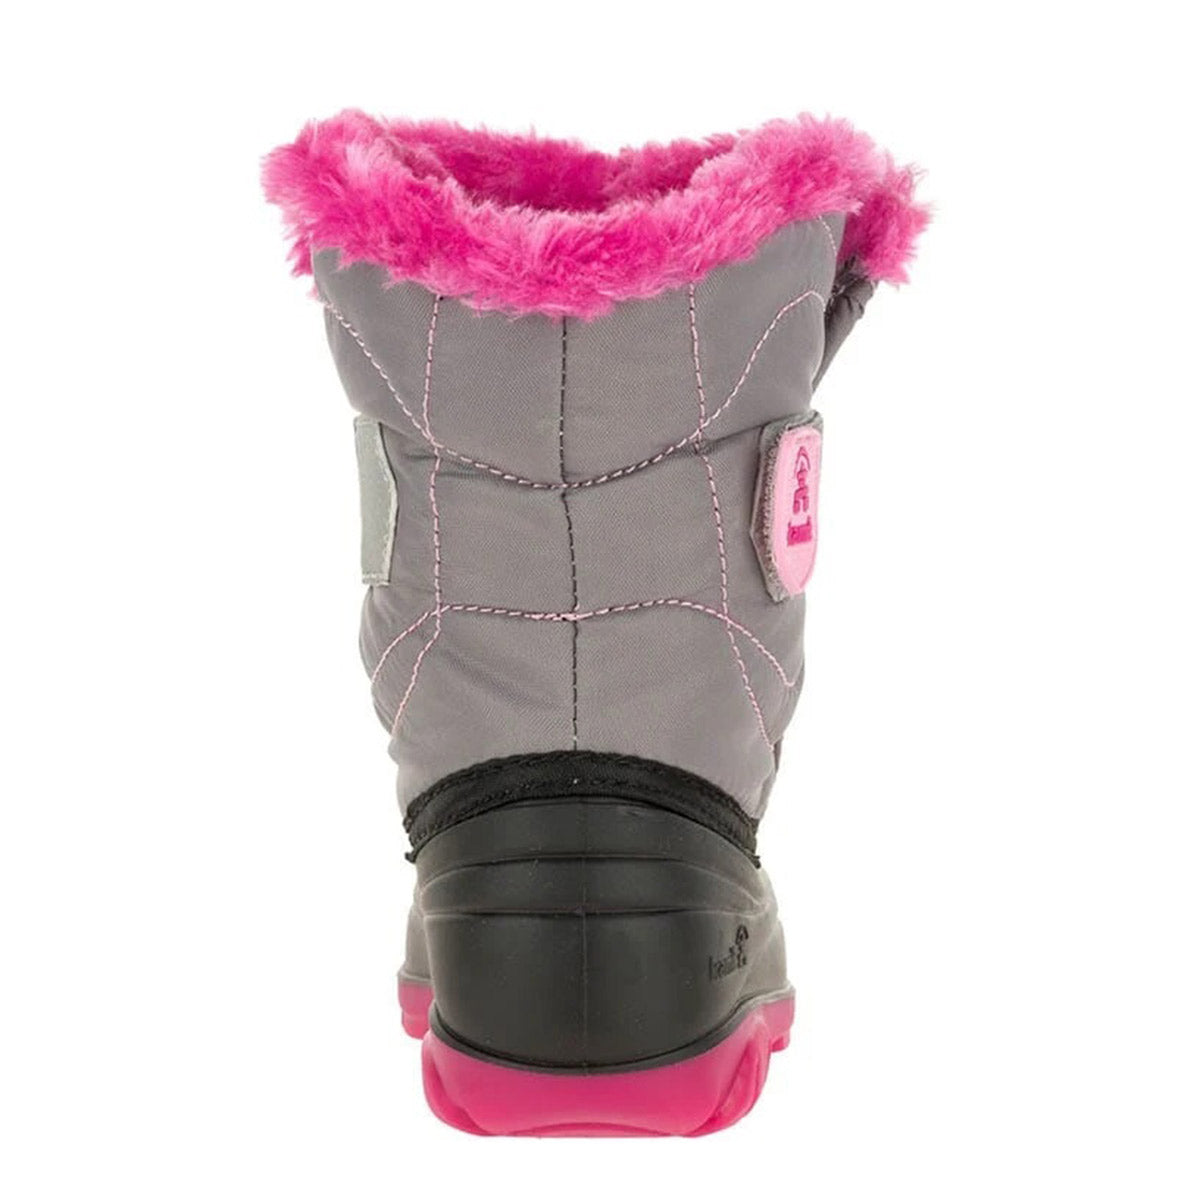 Gray and black Kamik Snowbug F winter boot with pink accents and fuzzy lining, made from waterproof 210 denier nylon, designed as a snowboot for toddlers.